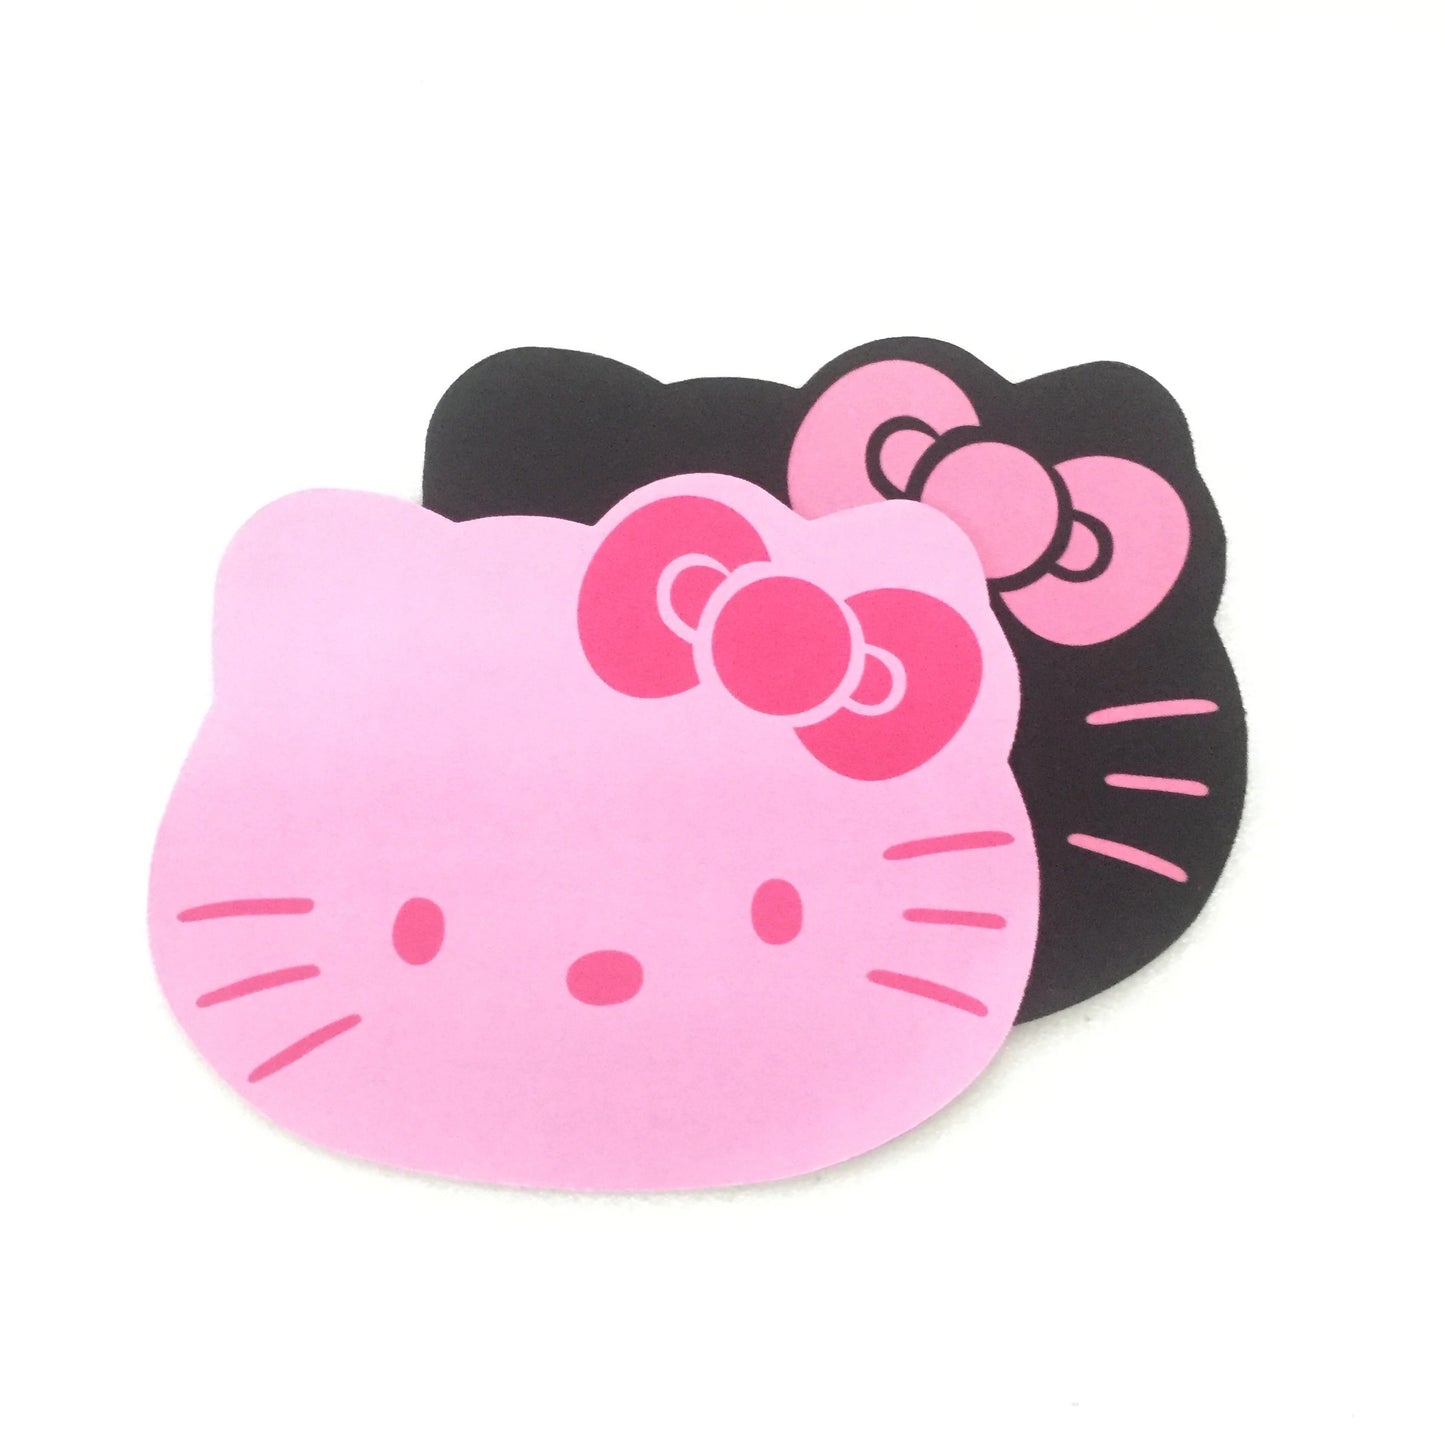 KT Mouse Pad Cute 2 Pack, Small Waterproof PVC Mousepad, Non-Slip Rubber Base Personalized Computer Mouse Mat for Office Home